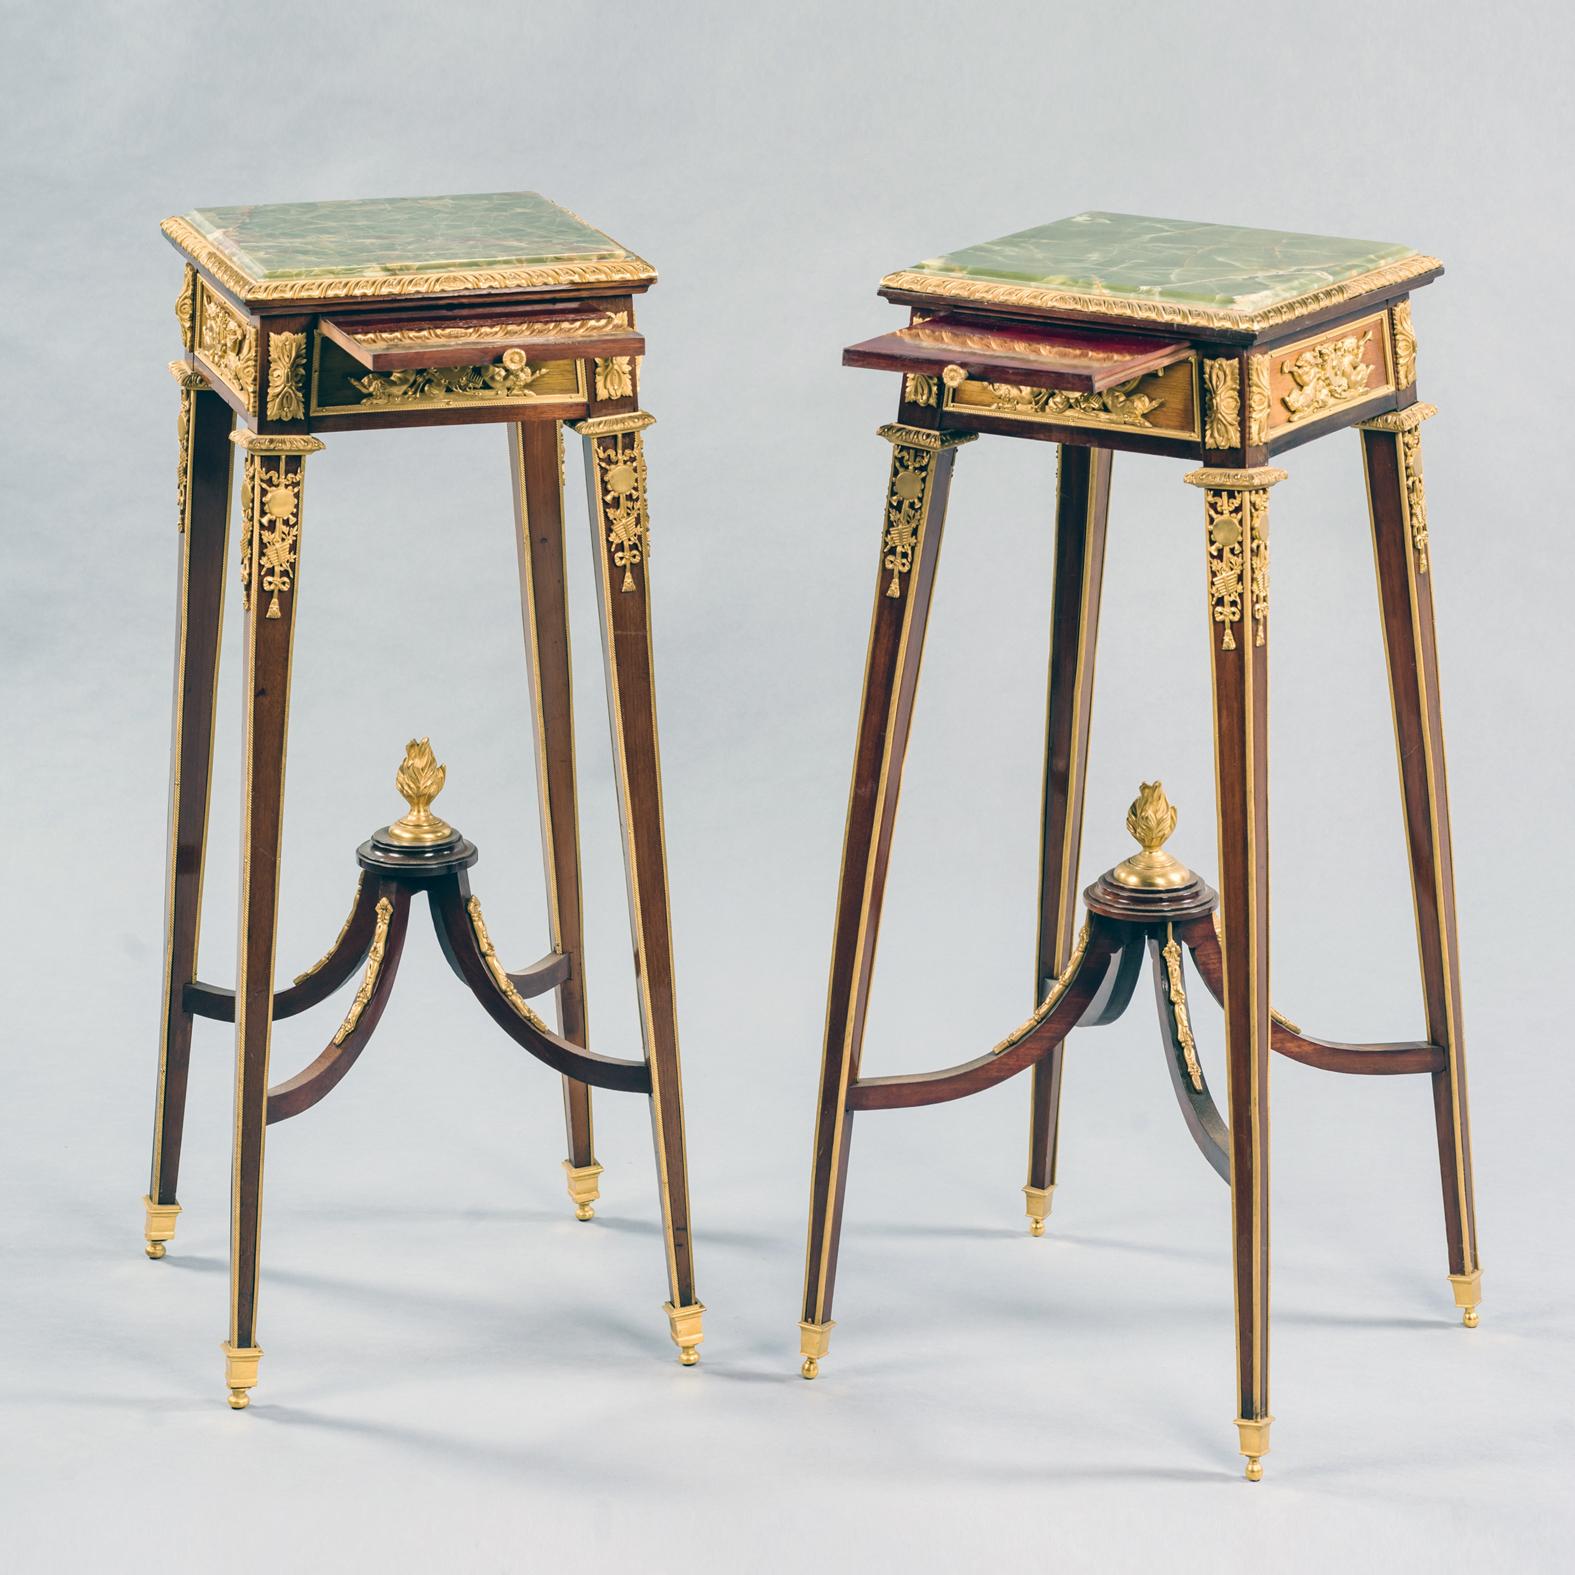 A fine pair of Louis XVI style gilt bronze mounted mahogany stands, firmly attributed to François Linke.

This delicate pair of mahogany pedestals or stands each have an inset green onyx top above a frieze mounted with allegorical scenes of music.